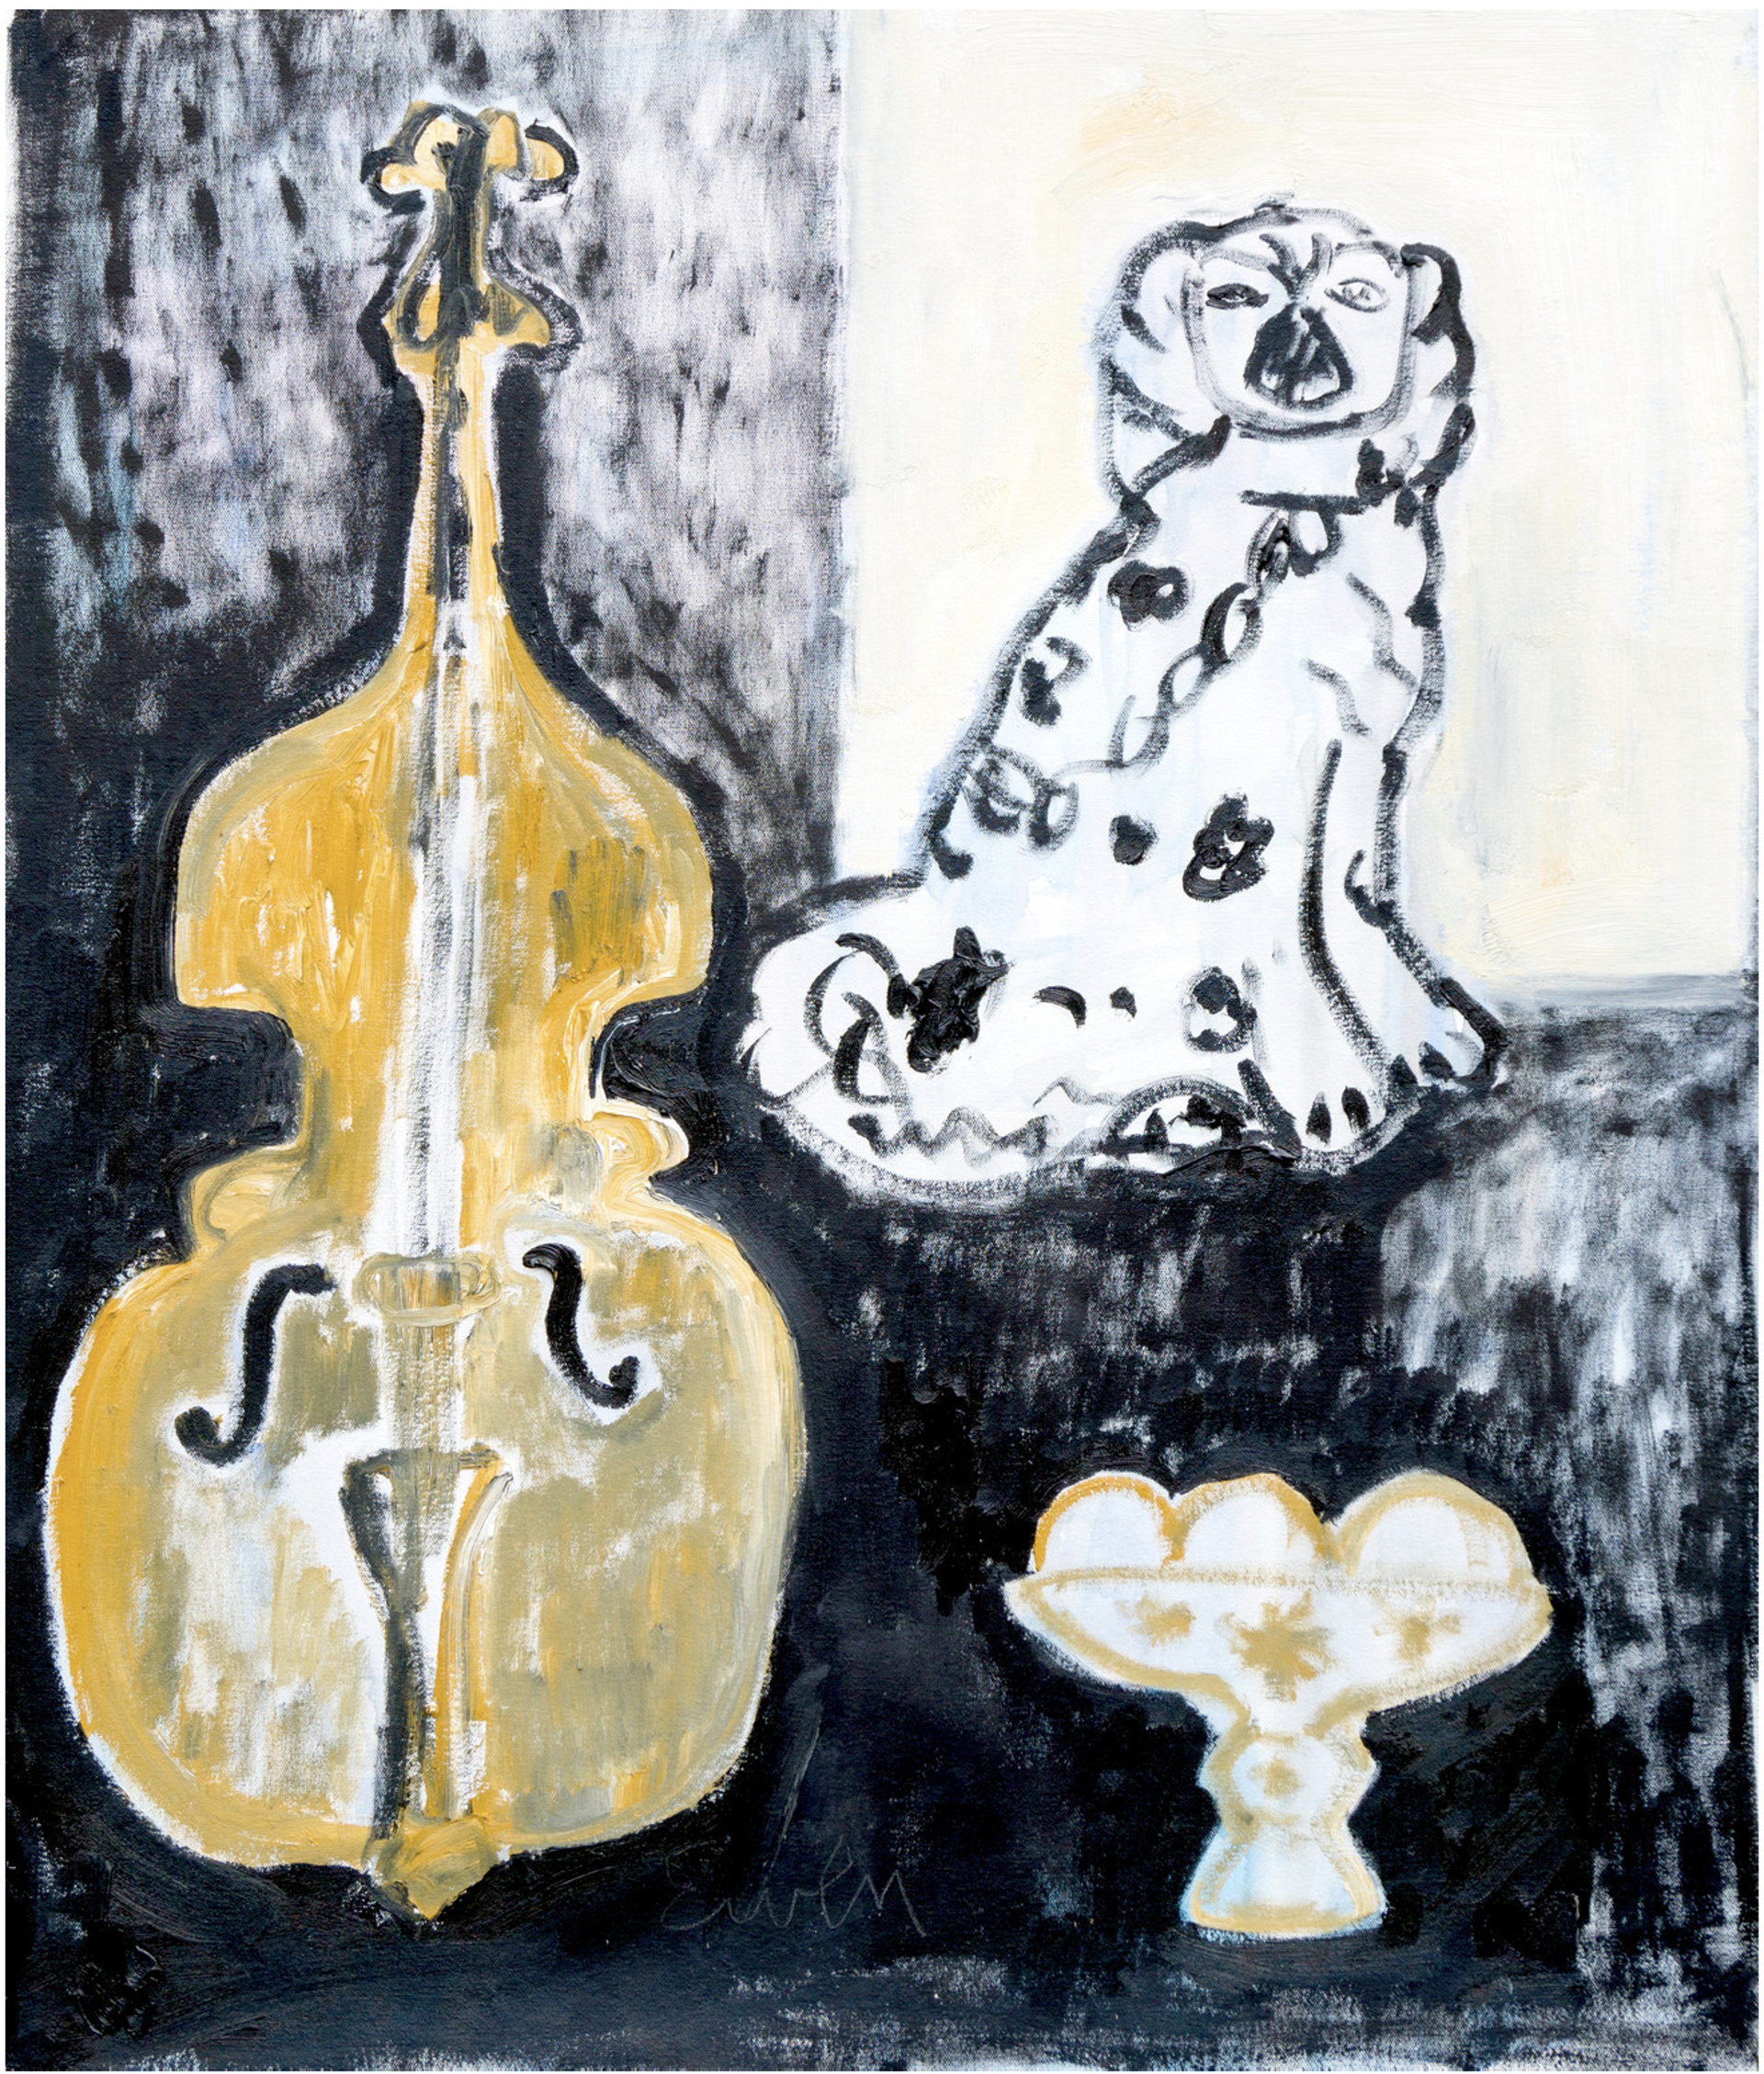 Still Life with Upright Bass by Anne-Louise Ewen